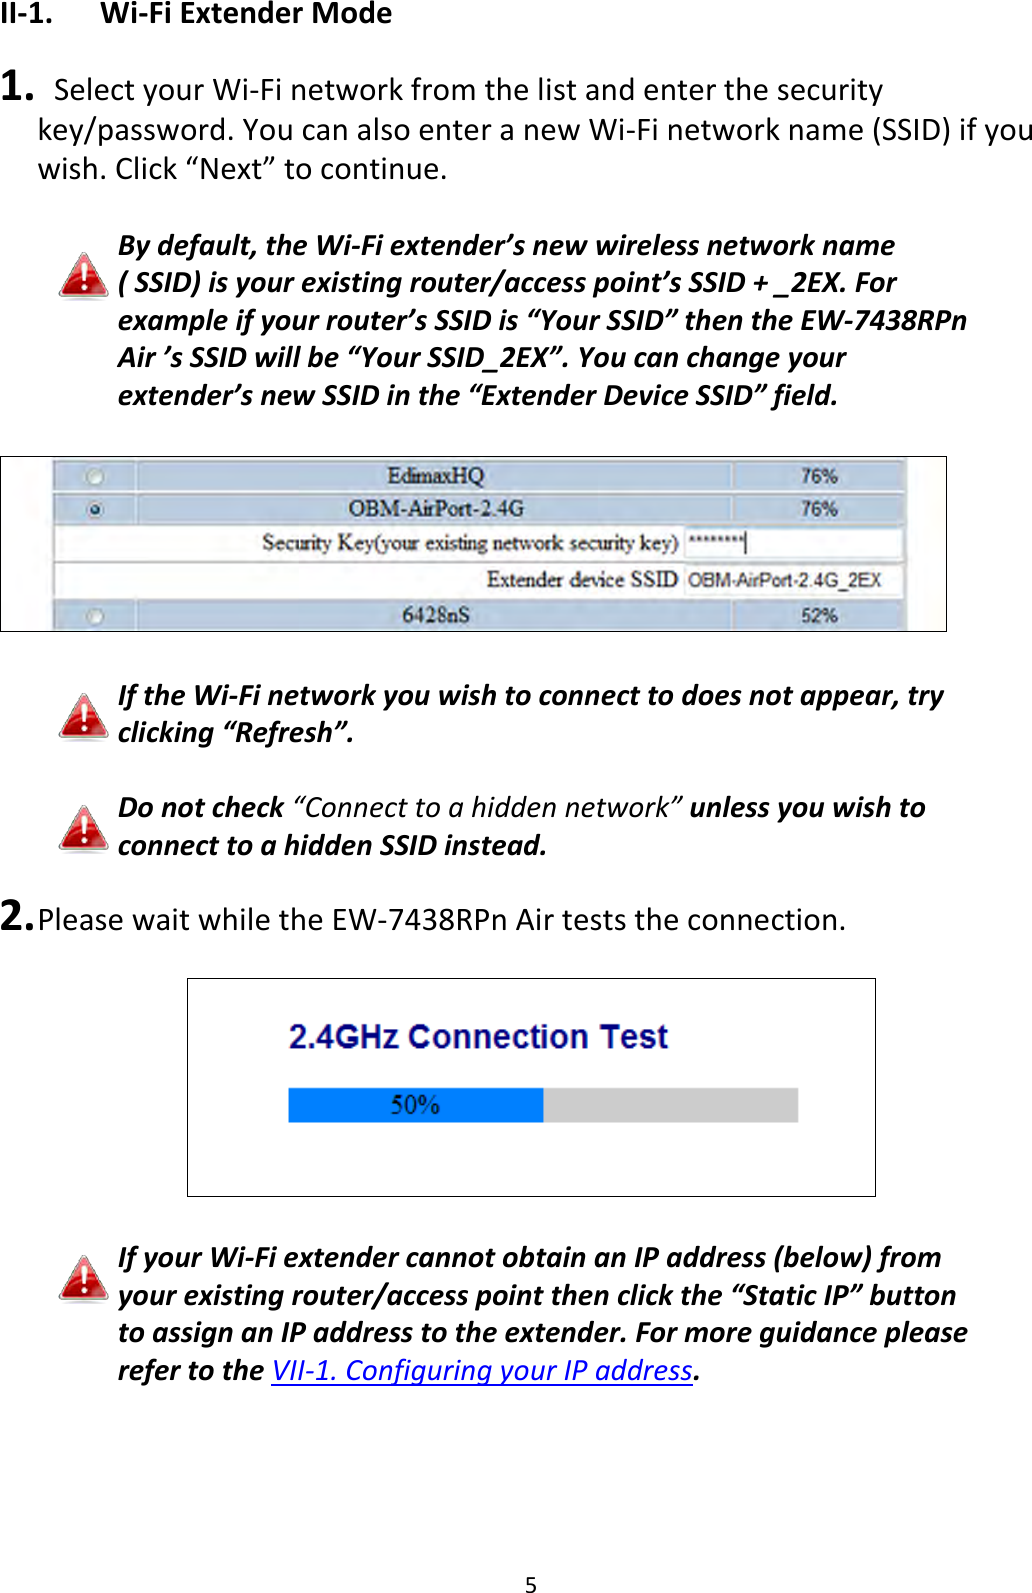 5 II-1. Wi-Fi Extender Mode  1.   Select your Wi-Fi network from the list and enter the security key/password. You can also enter a new Wi-Fi network name (SSID) if you wish. Click “Next” to continue.  By default, the Wi-Fi extender’s new wireless network name ( SSID) is your existing router/access point’s SSID + _2EX. For example if your router’s SSID is “Your SSID” then the EW-7438RPn Air ’s SSID will be “Your SSID_2EX”. You can change your extender’s new SSID in the “Extender Device SSID” field.    If the Wi-Fi network you wish to connect to does not appear, try clicking “Refresh”.  Do not check “Connect to a hidden network” unless you wish to connect to a hidden SSID instead.  2. Please wait while the EW-7438RPn Air tests the connection.    If your Wi-Fi extender cannot obtain an IP address (below) from your existing router/access point then click the “Static IP” button to assign an IP address to the extender. For more guidance please refer to the VII-1. Configuring your IP address.  